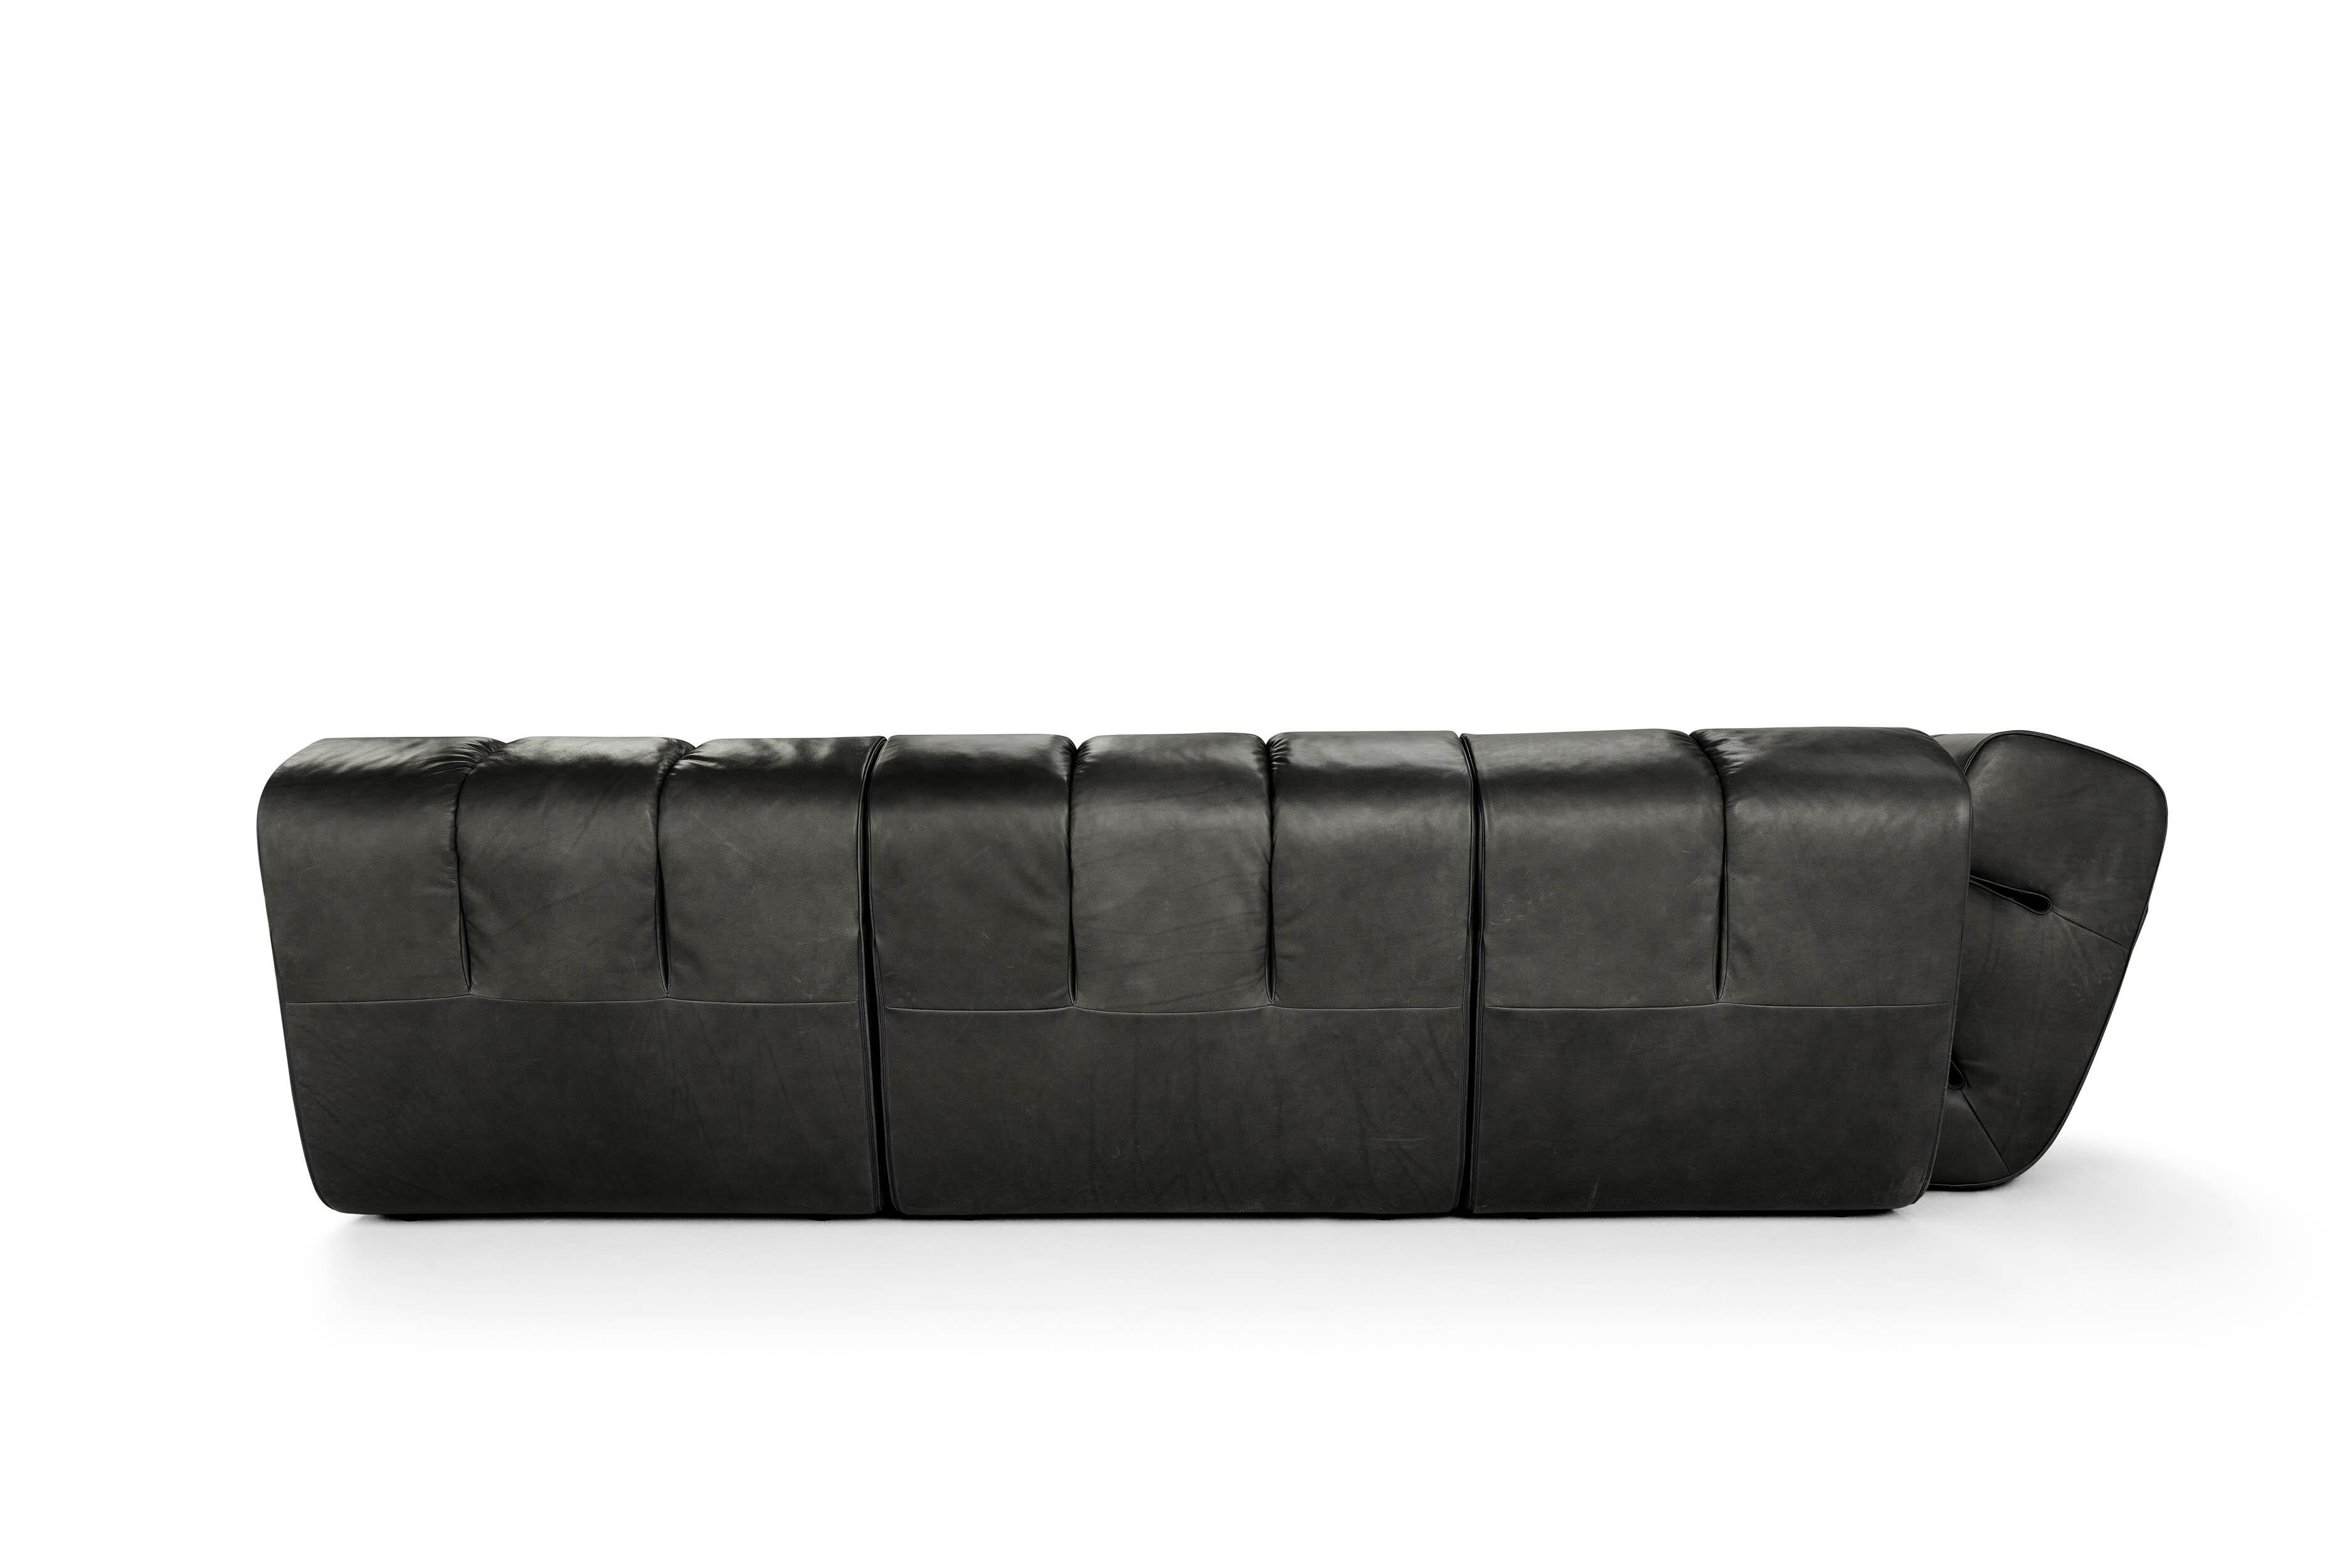 'Palmo' Modular Sofa in Leather, Stone Wash 263 For Sale 10